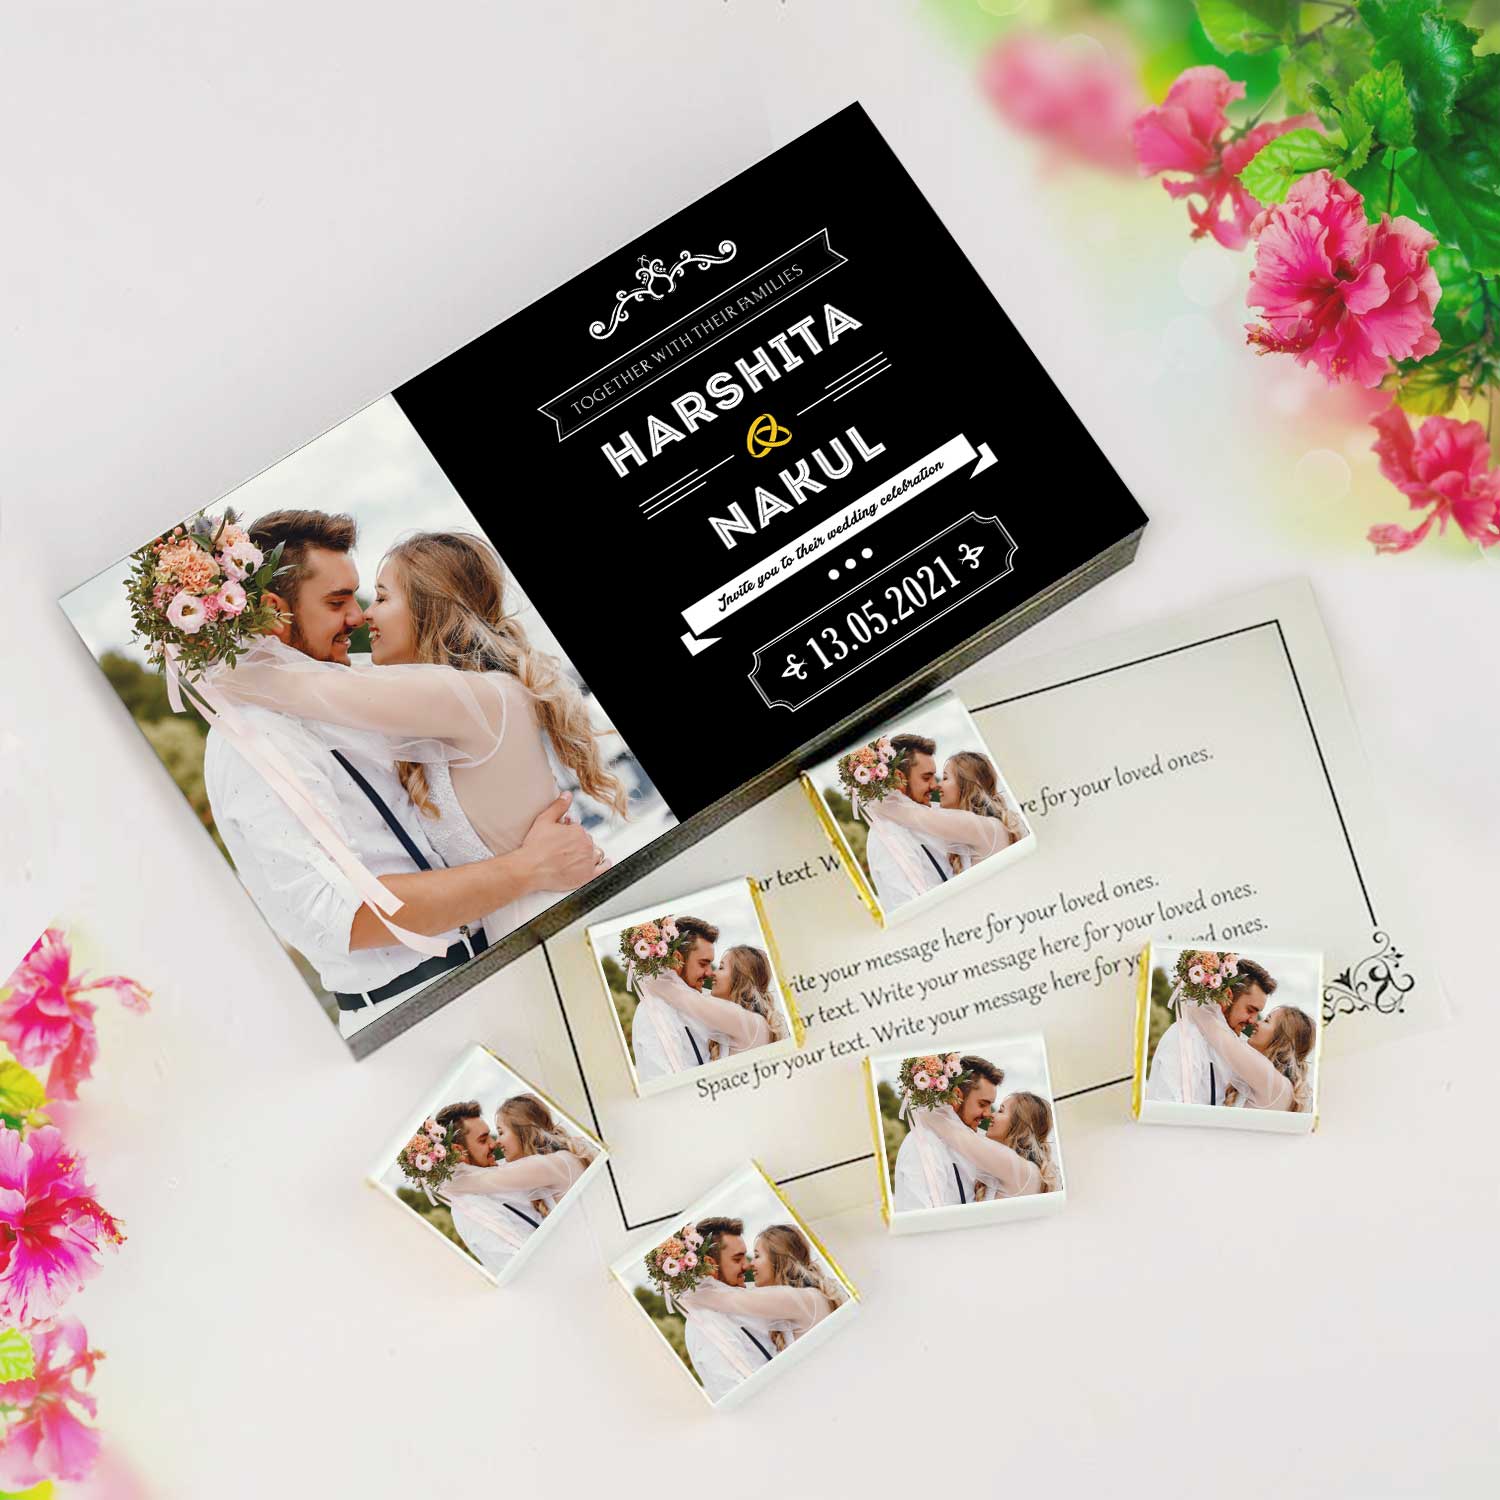 Delicate wedding rings printed wrapped chocolates invitationpersonalized chocolate box for wedding invitation. customized  chocolate box for gift.